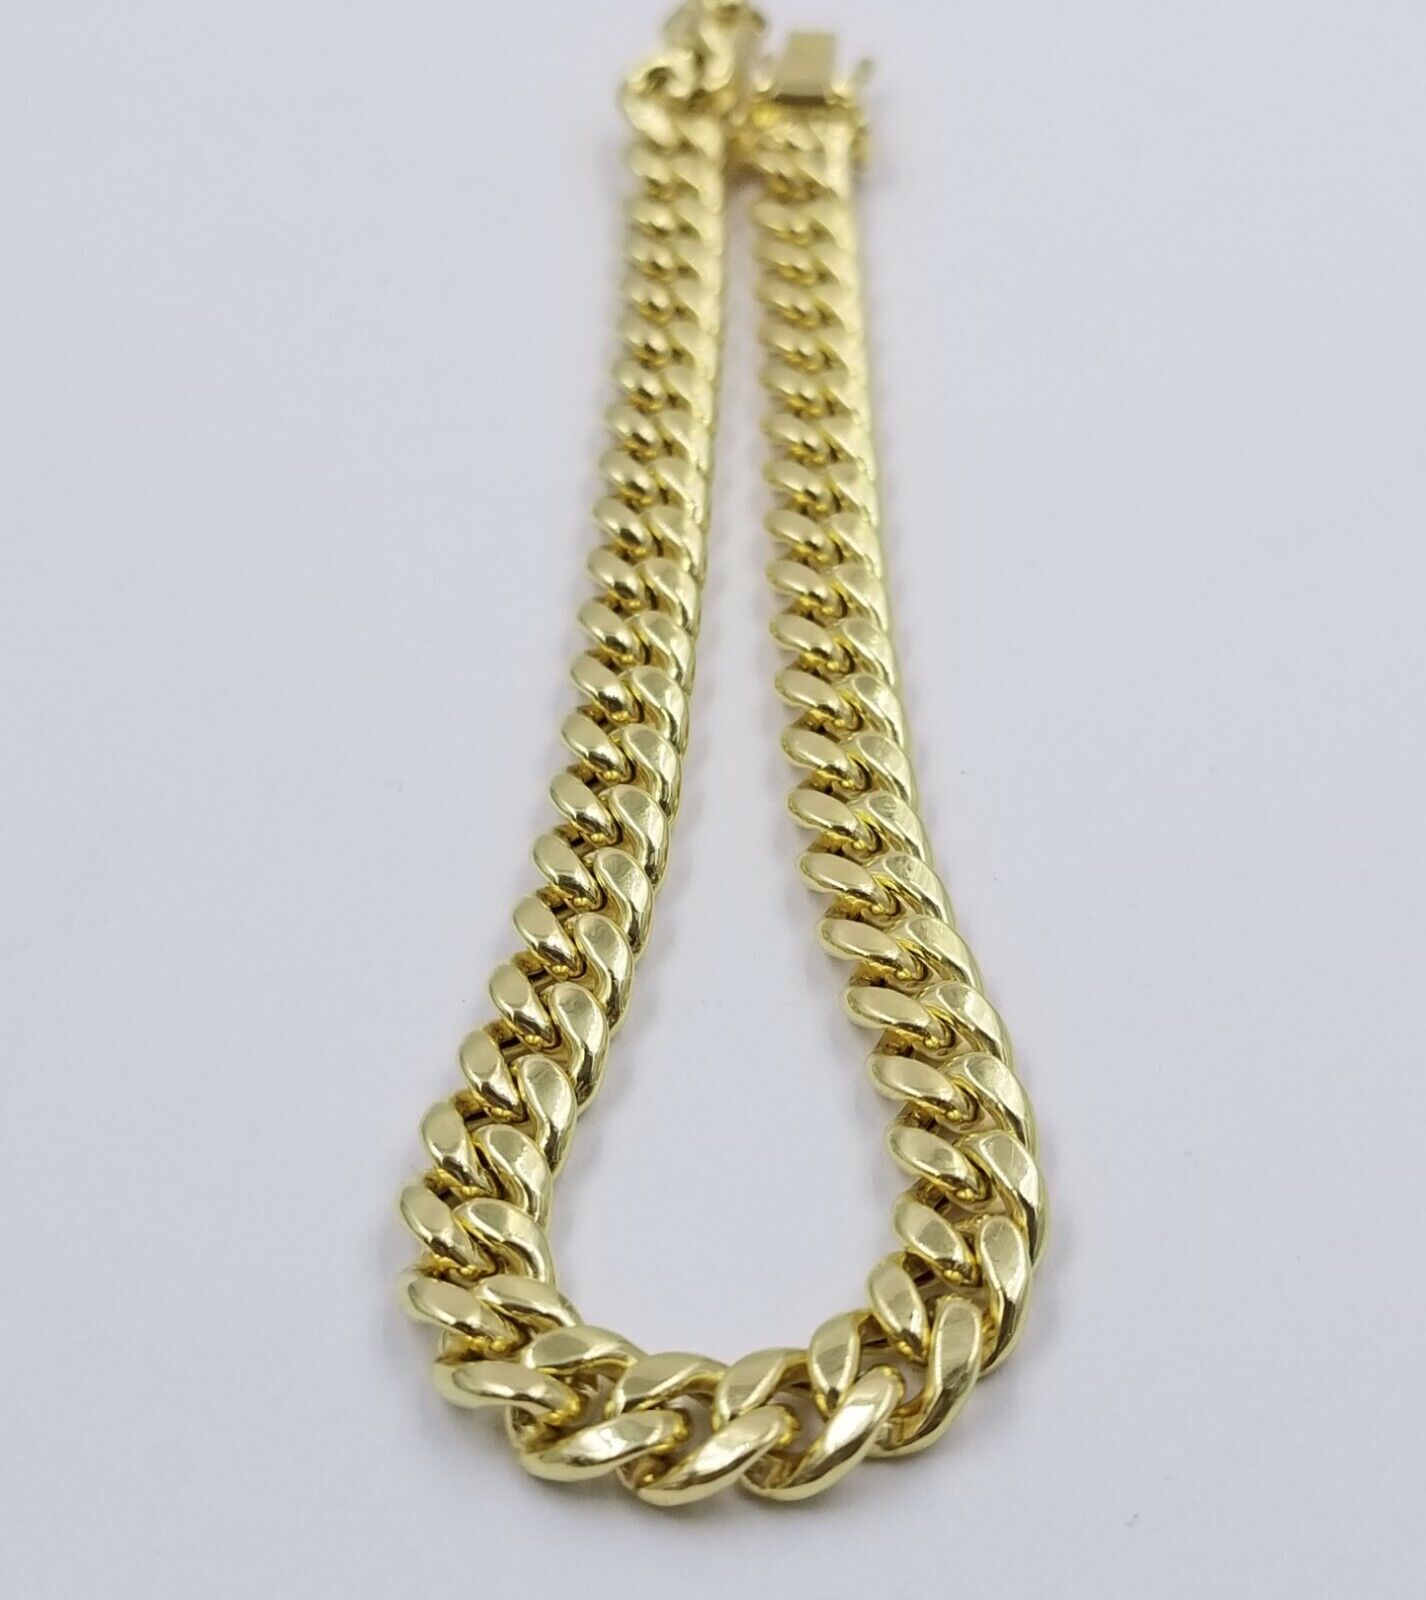 10K Real Yellow Gold Miami Cuban Bracelet 5.5 to 6mm Link 7.5 inch Box Lock Link